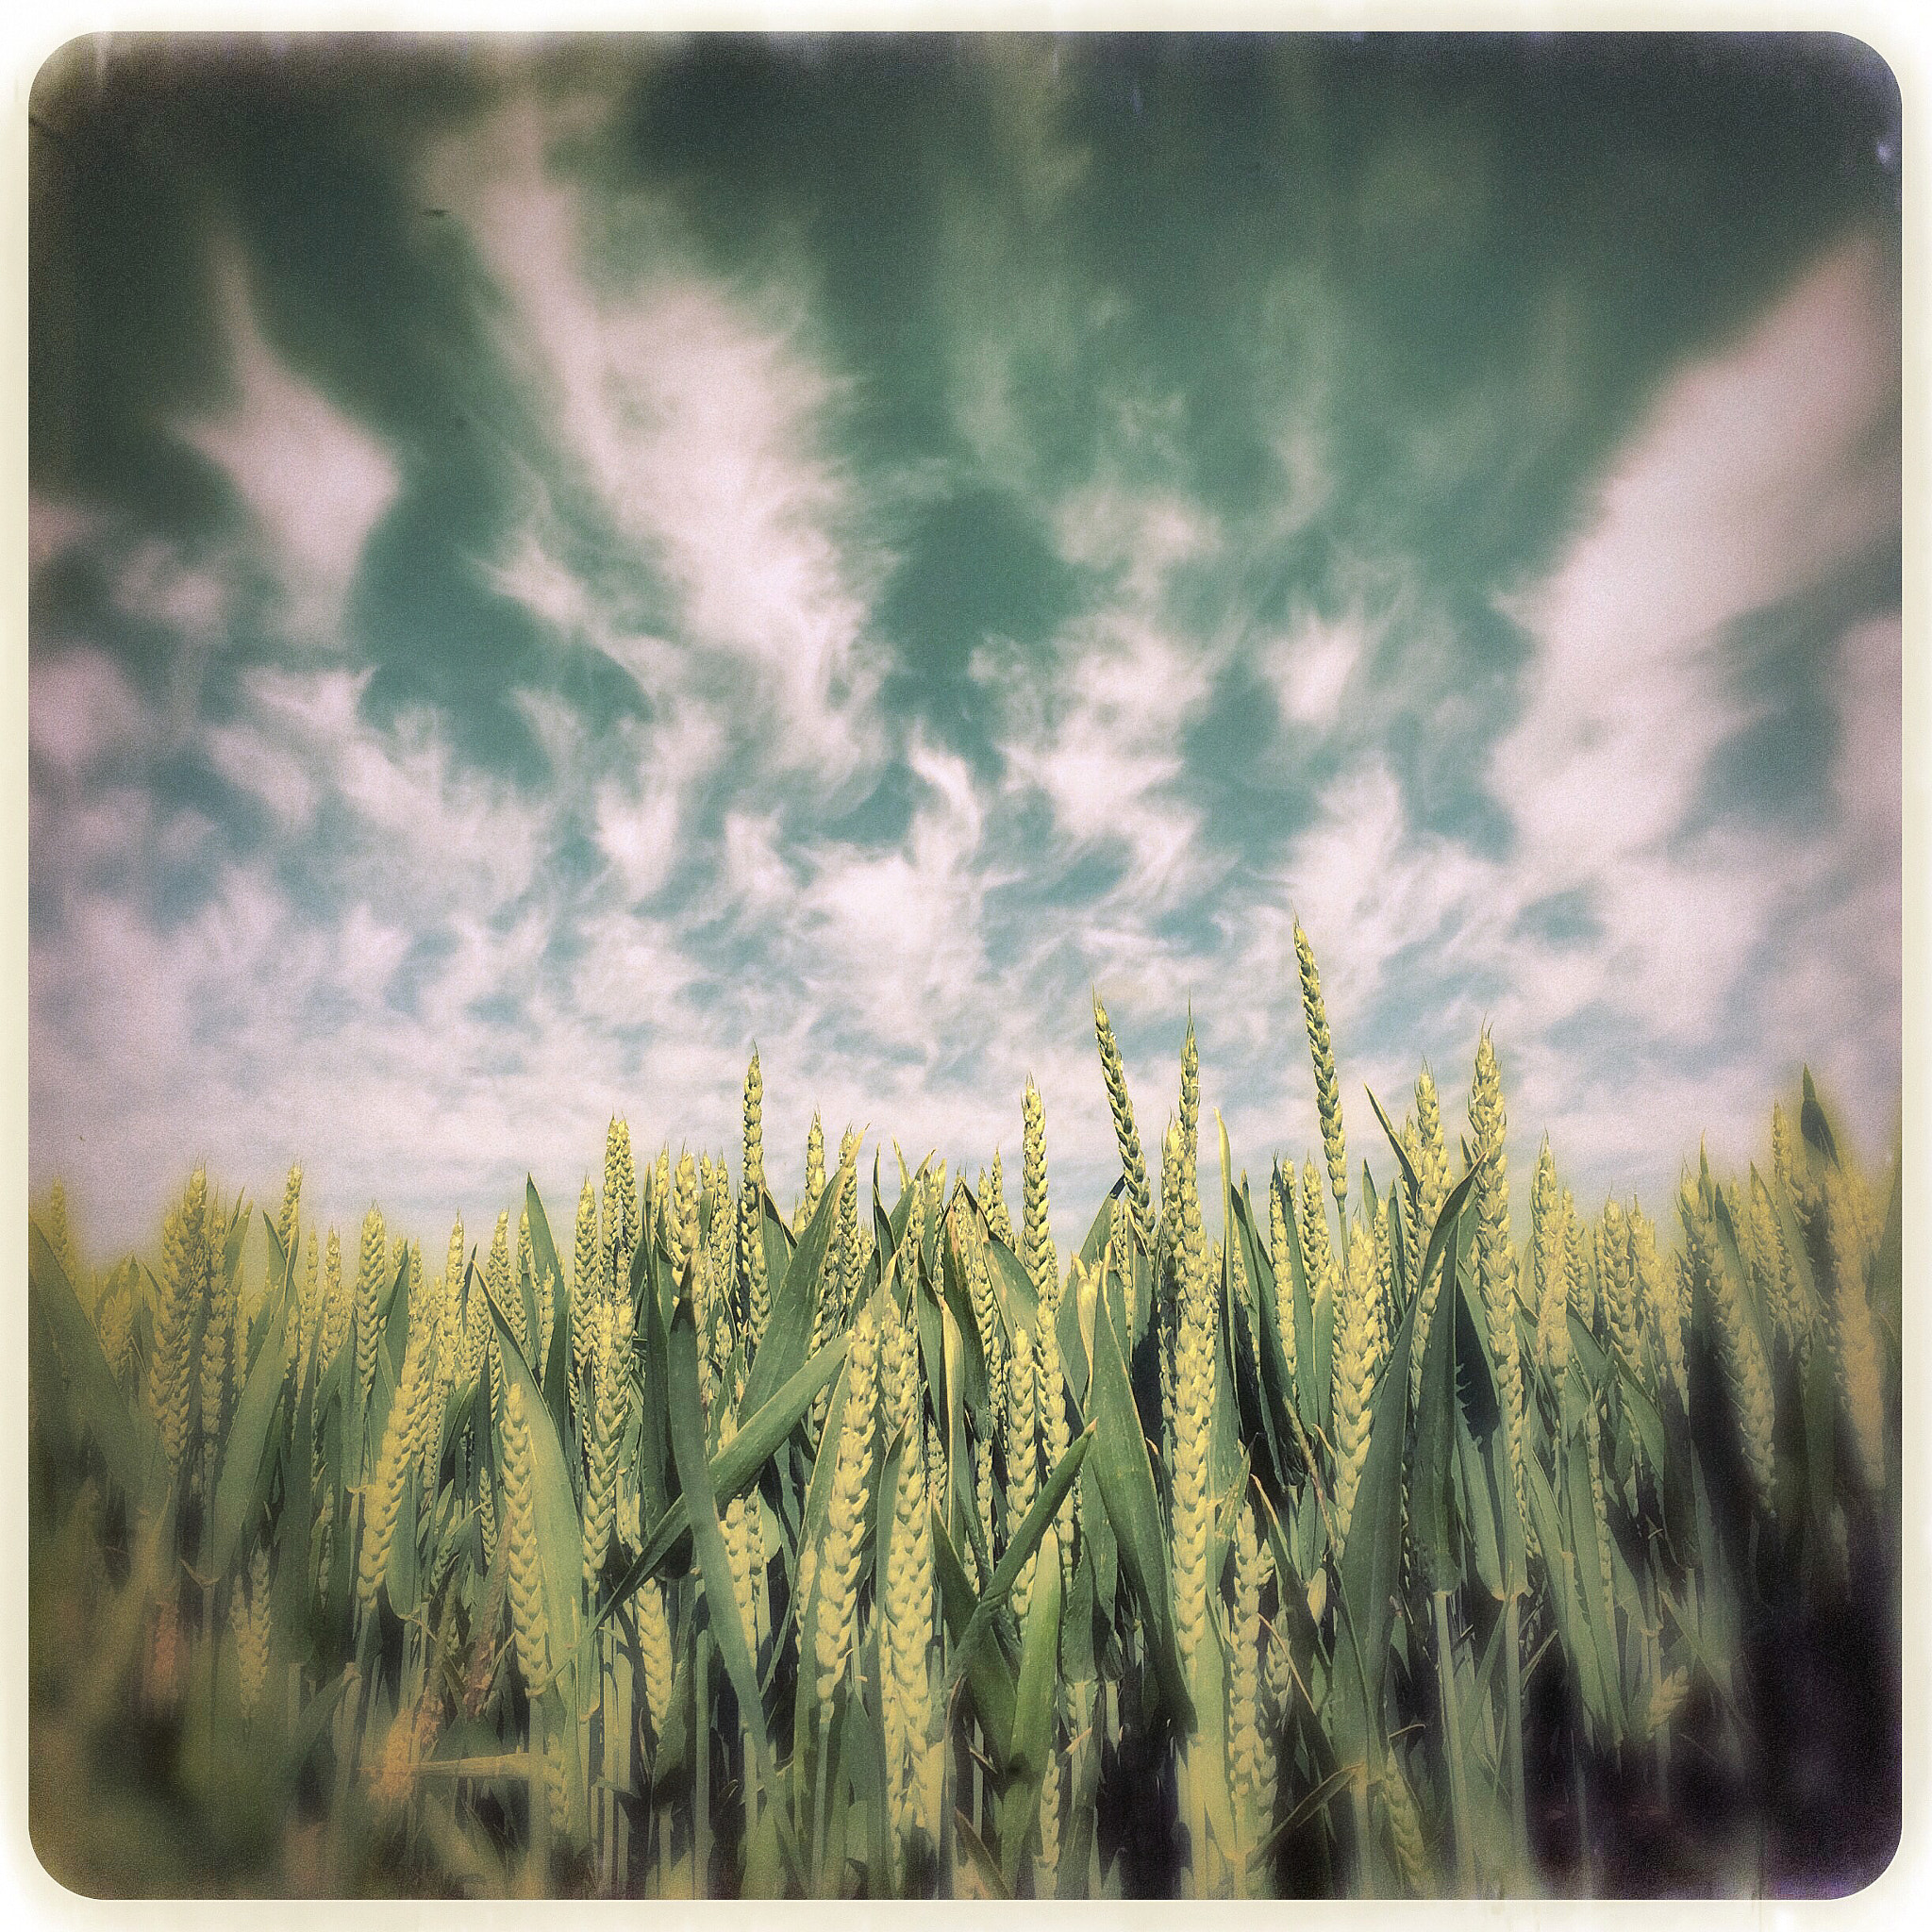 Hipstamatic 275 + iPhone 5s back camera 4.12mm f/2.2 sample photo. Wheat and sky photography